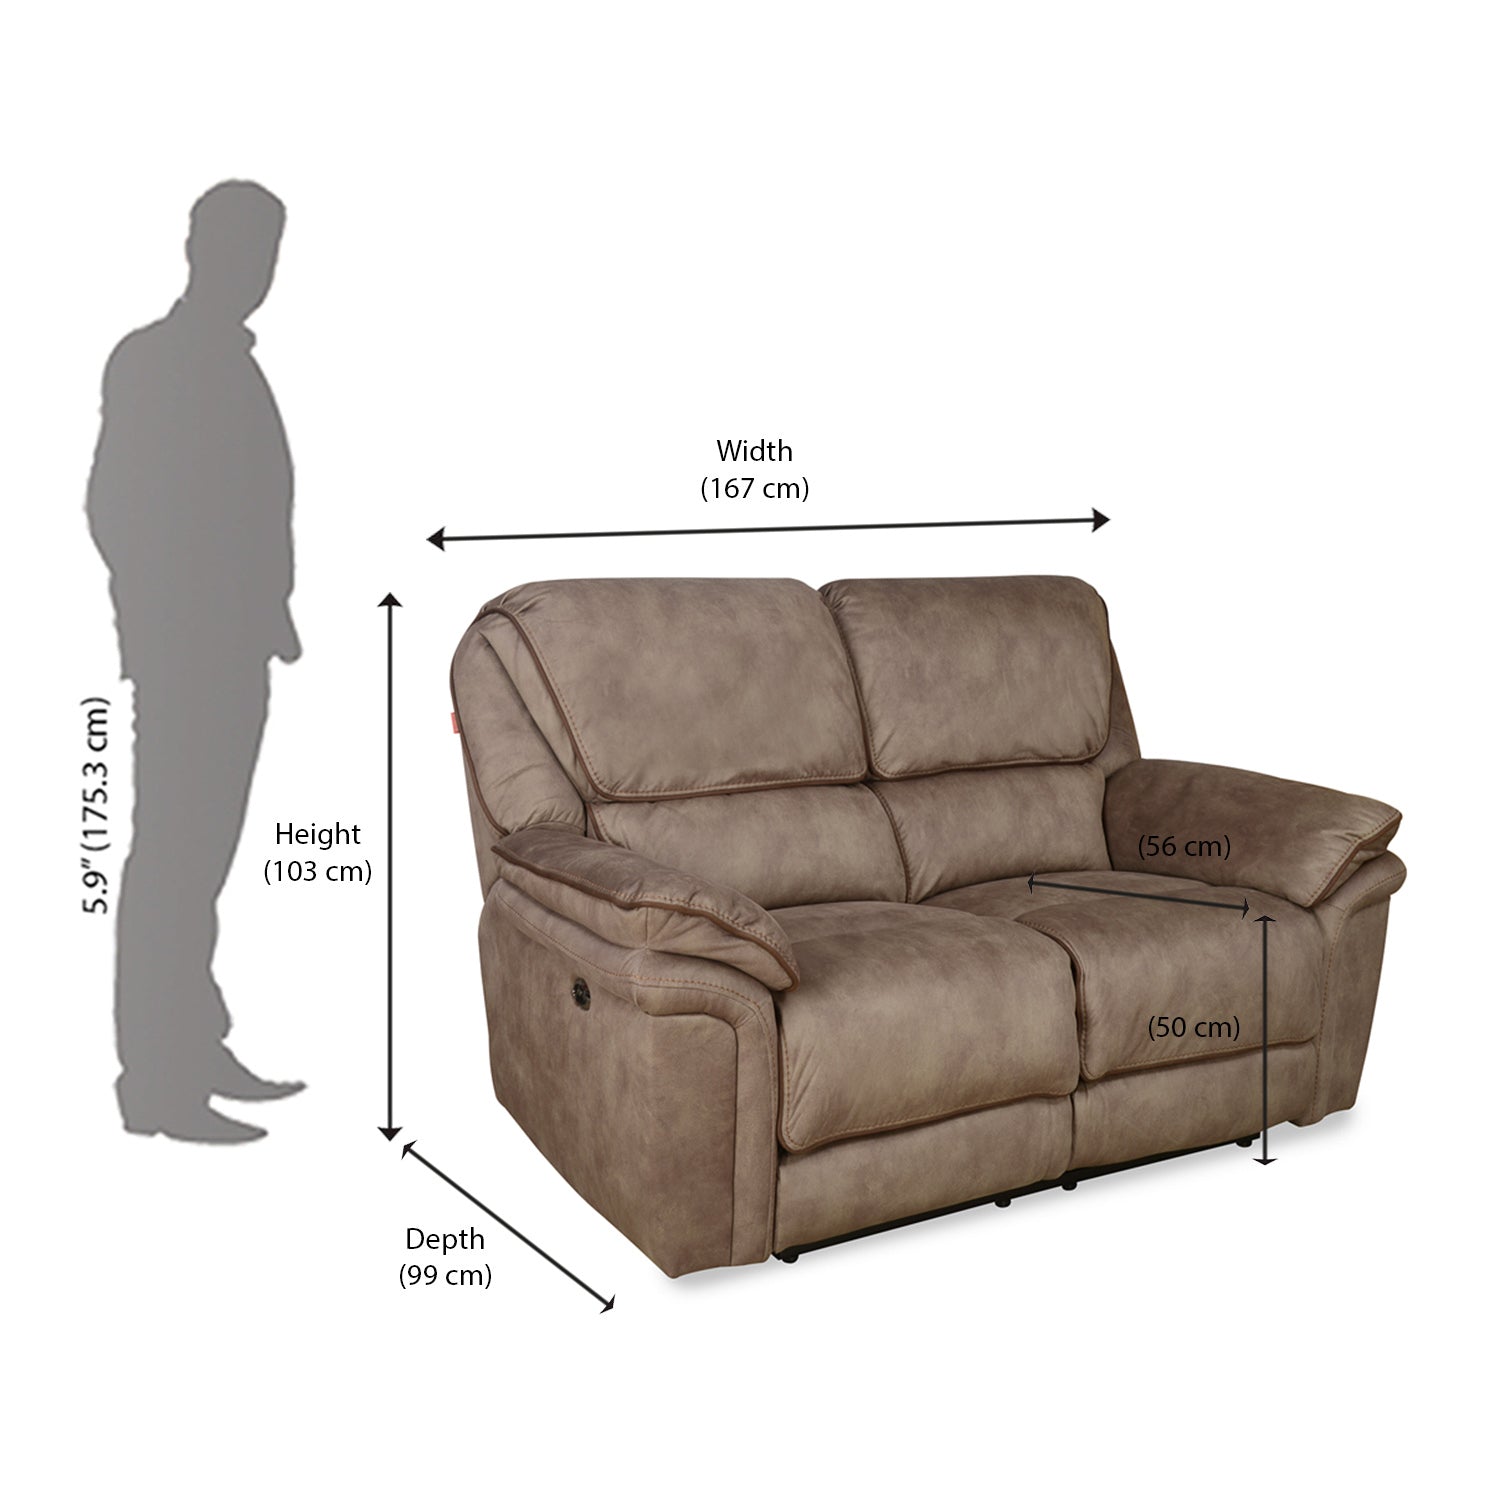 Fuzzy 2 Seater Sofa with 2 Electric Recliner (Mocha Brown)